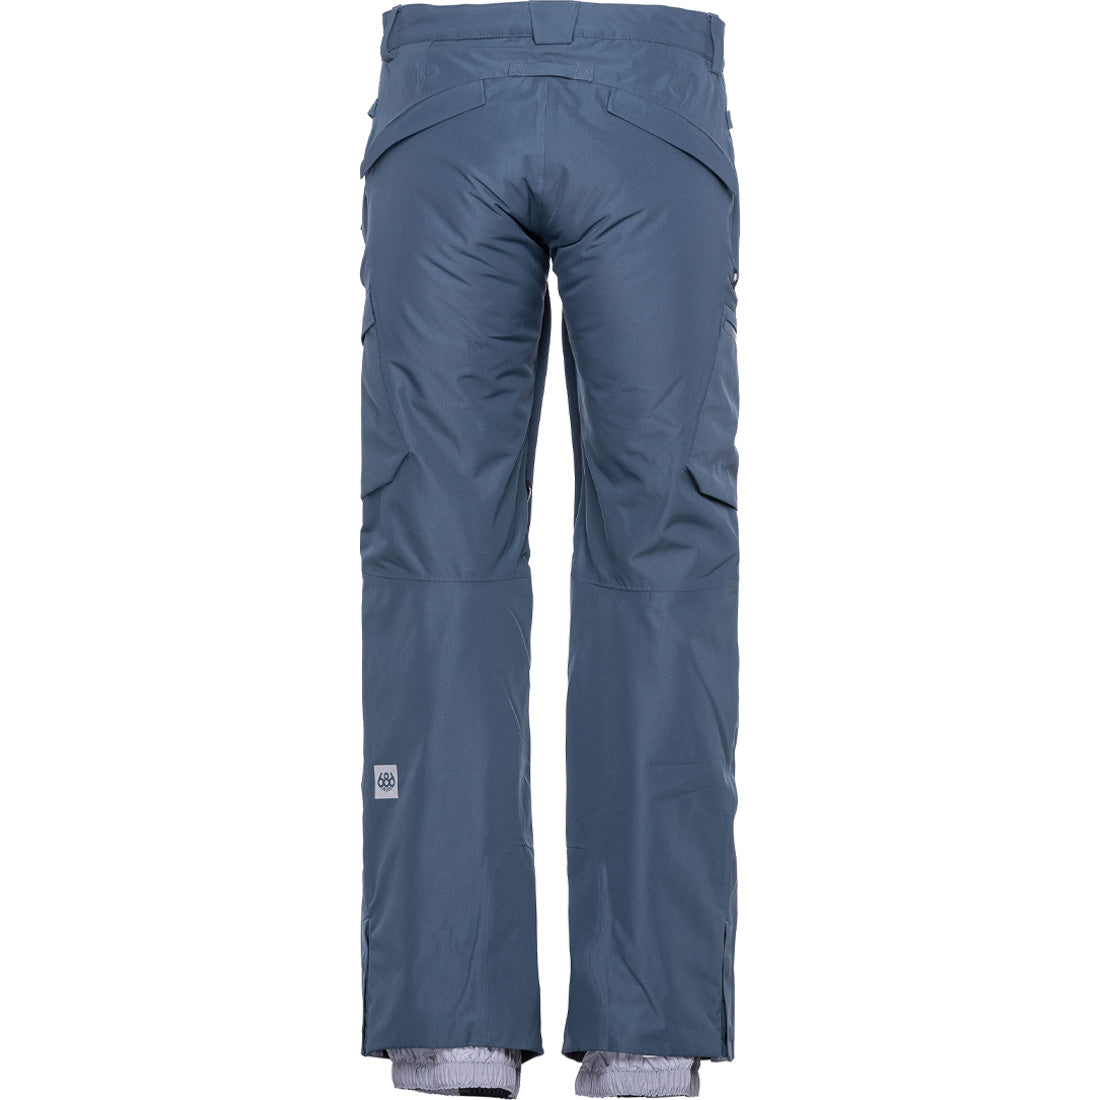 686 Geode Thermagraph Pant (Past Season) - Women's